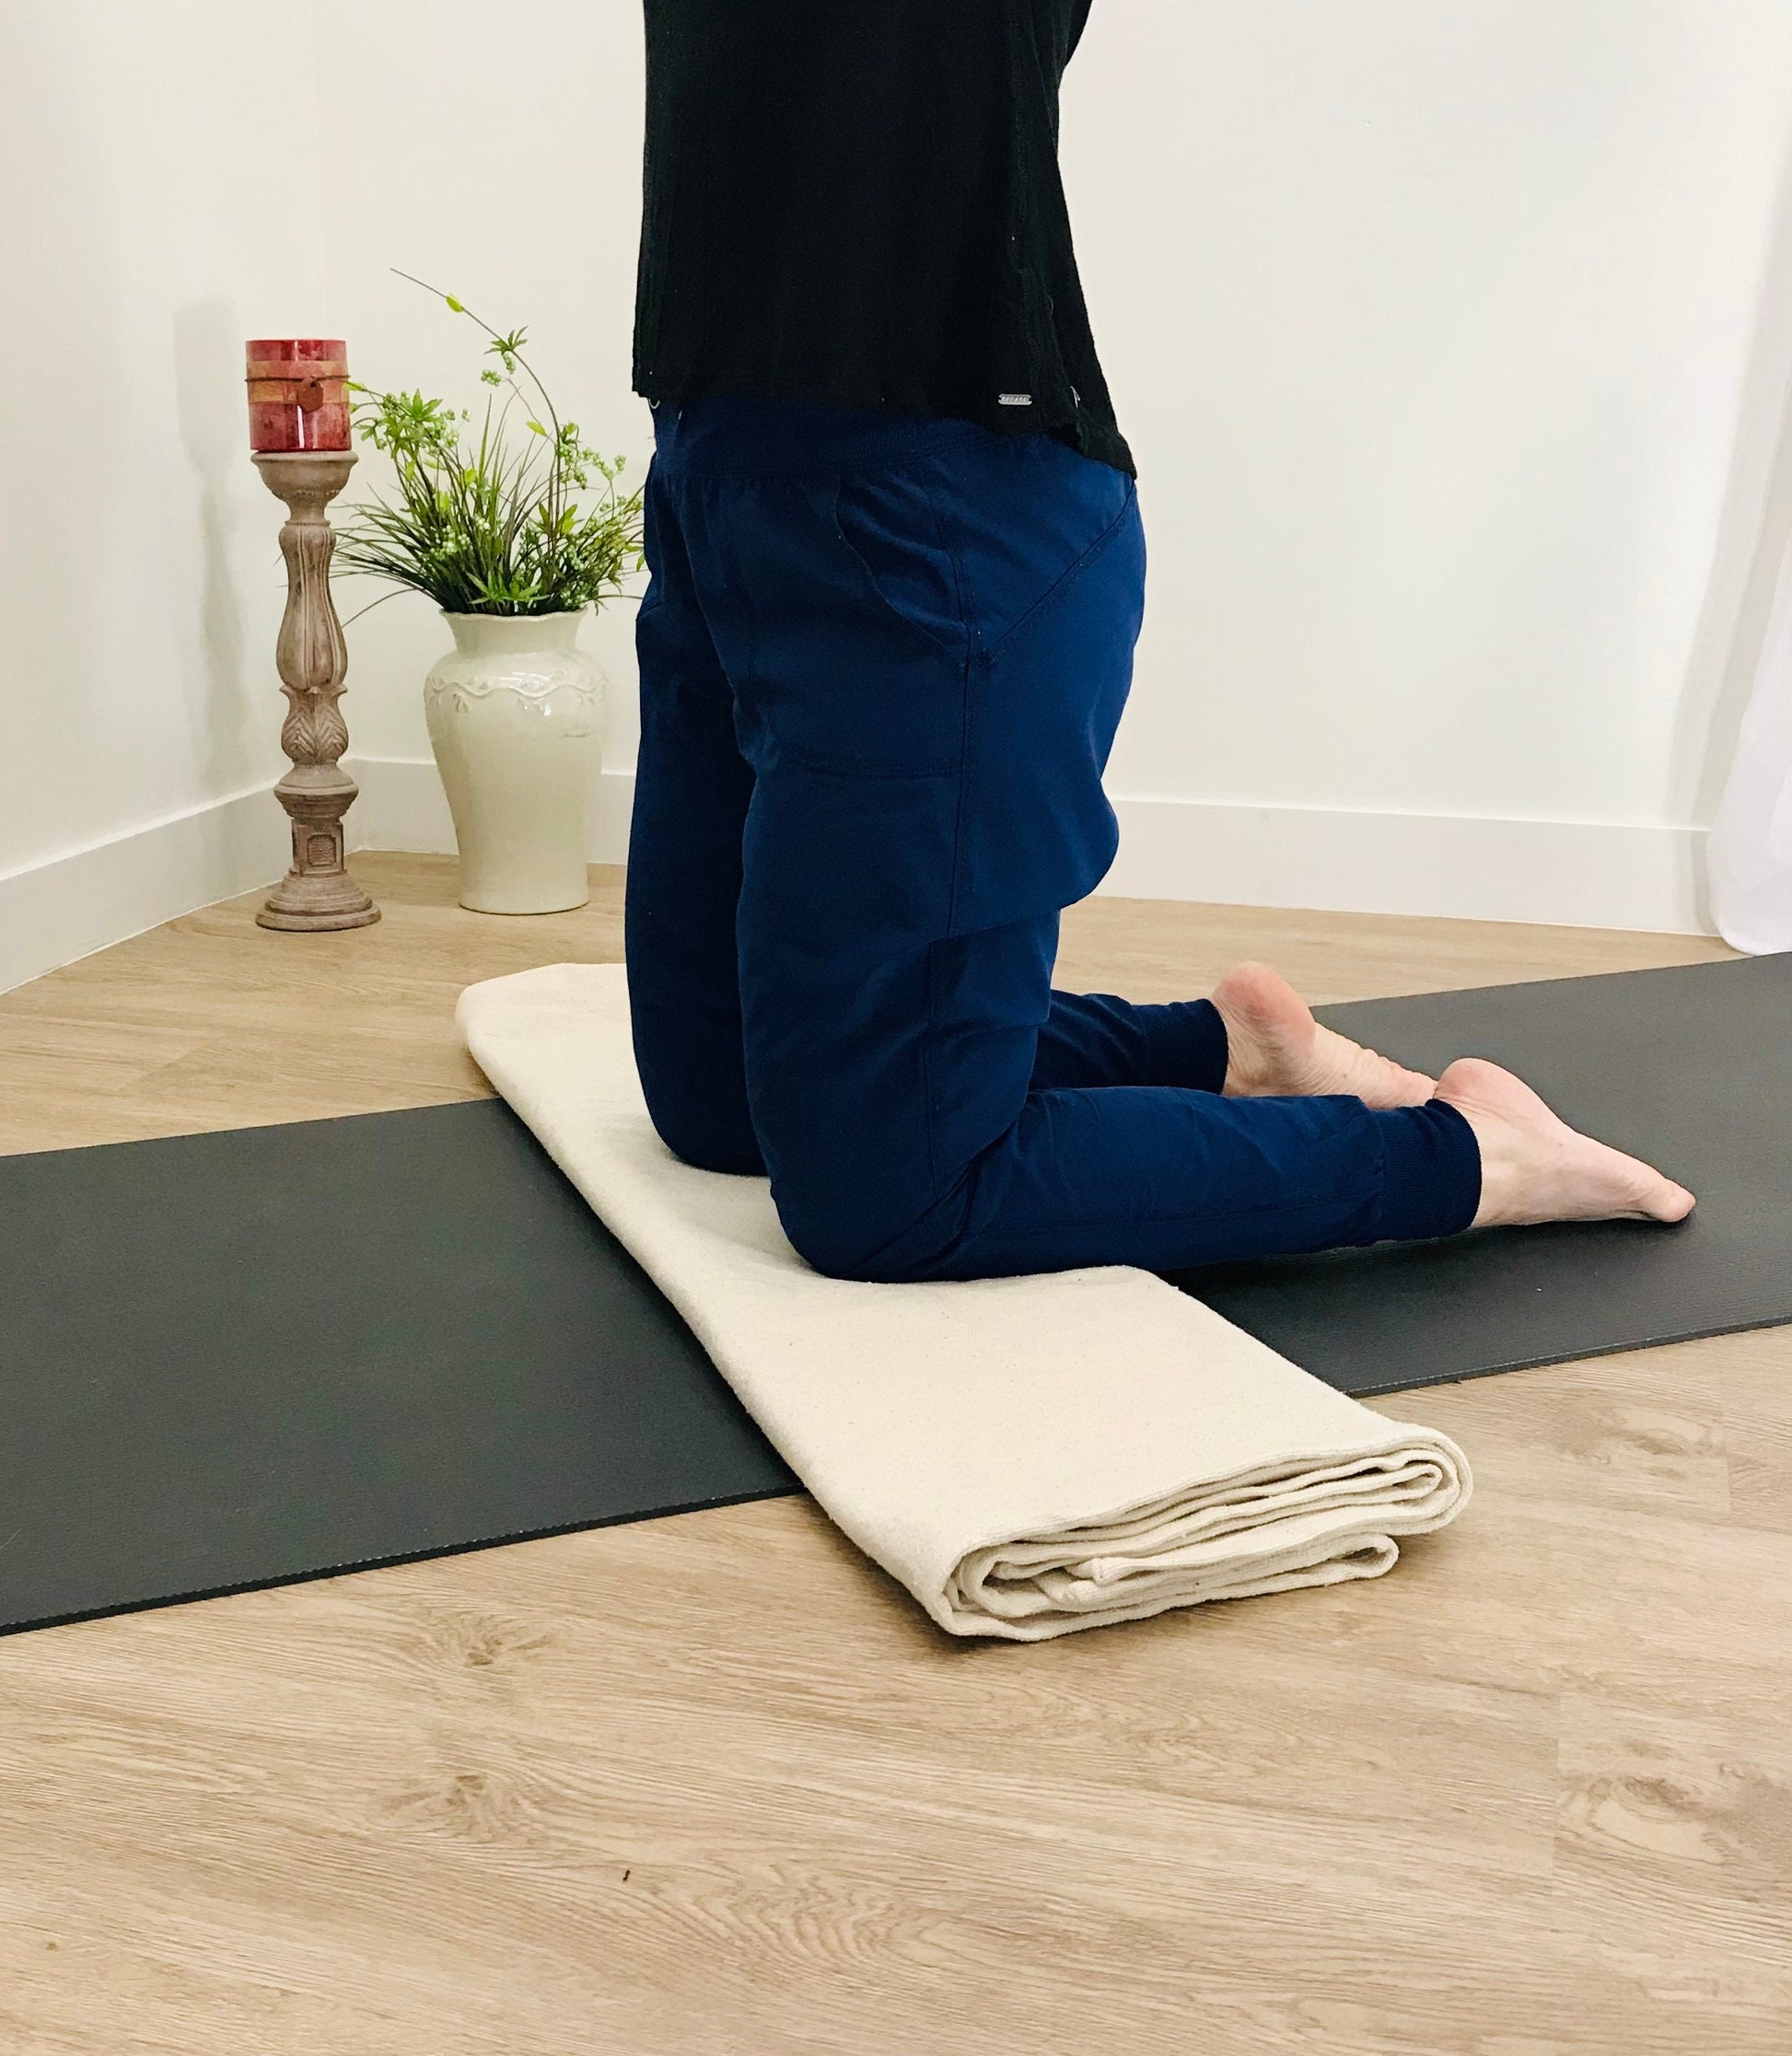 100 % organic cotton yoga blanket. Thick weave and large size to create comfort and easy to your yoga practice. Demonstration of protecting knees in yoga posture